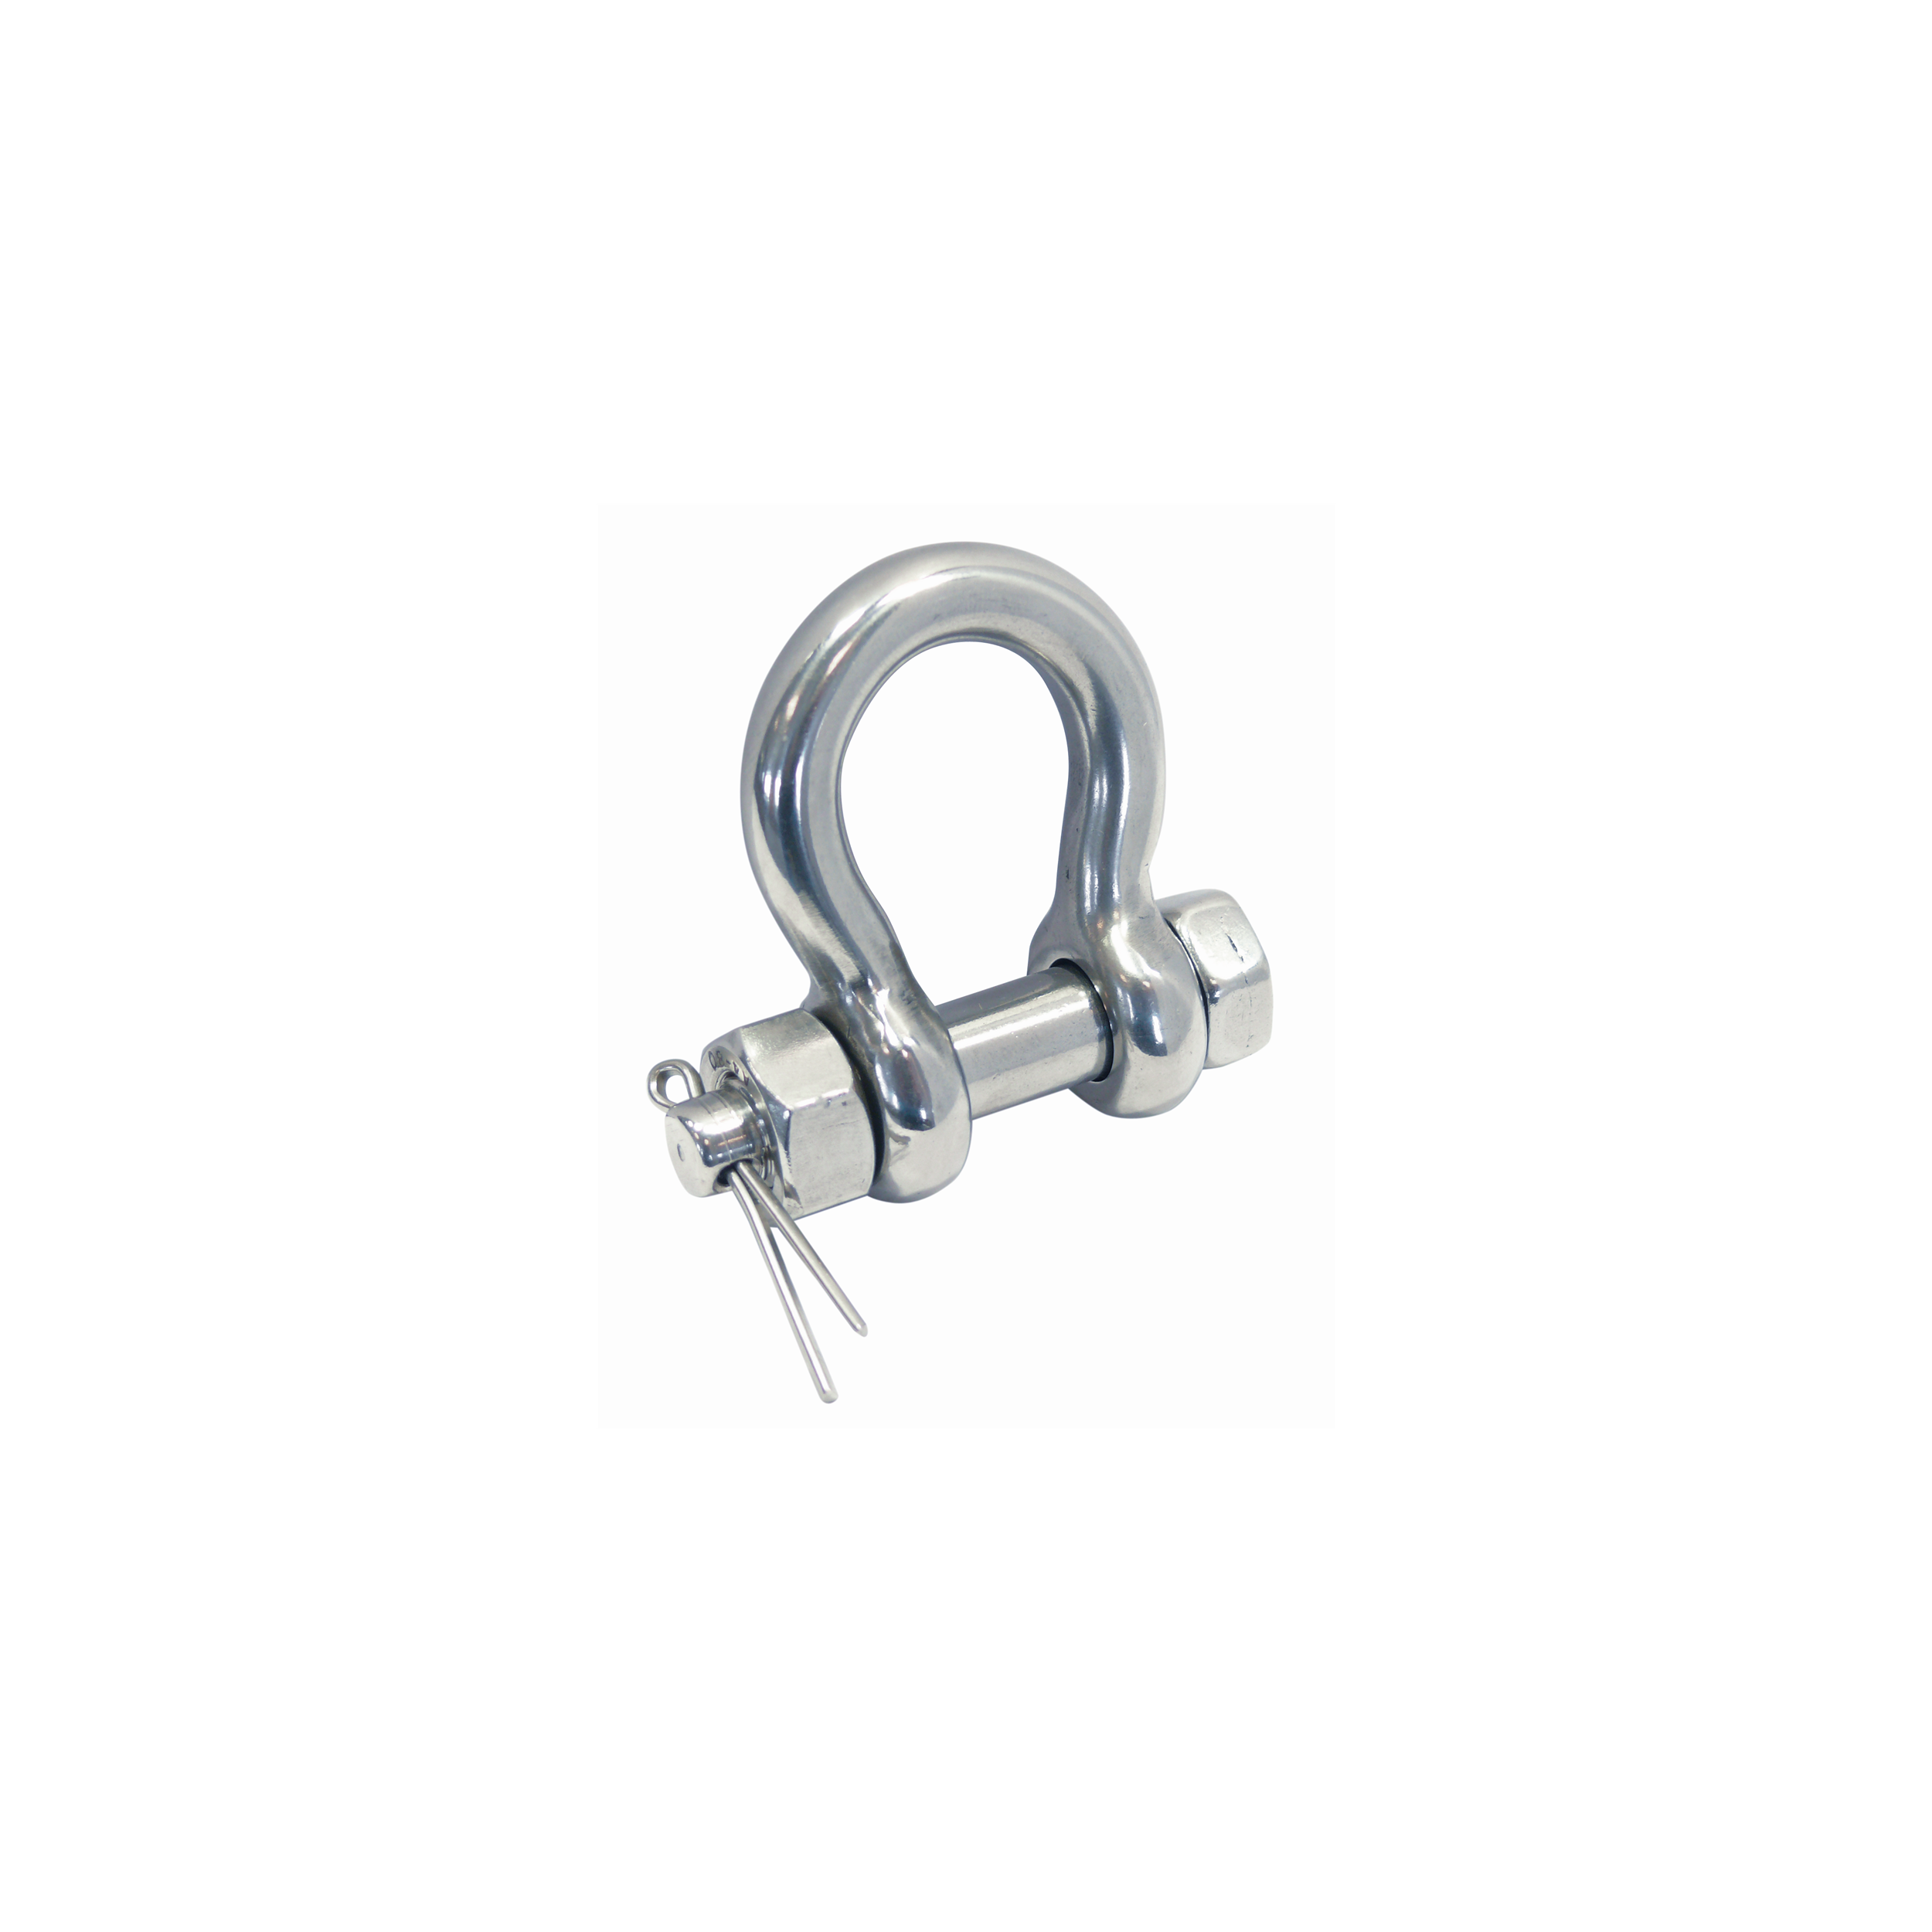 Bow shackle with secure bolt A4  bolt 8.0mm, bow 6mm